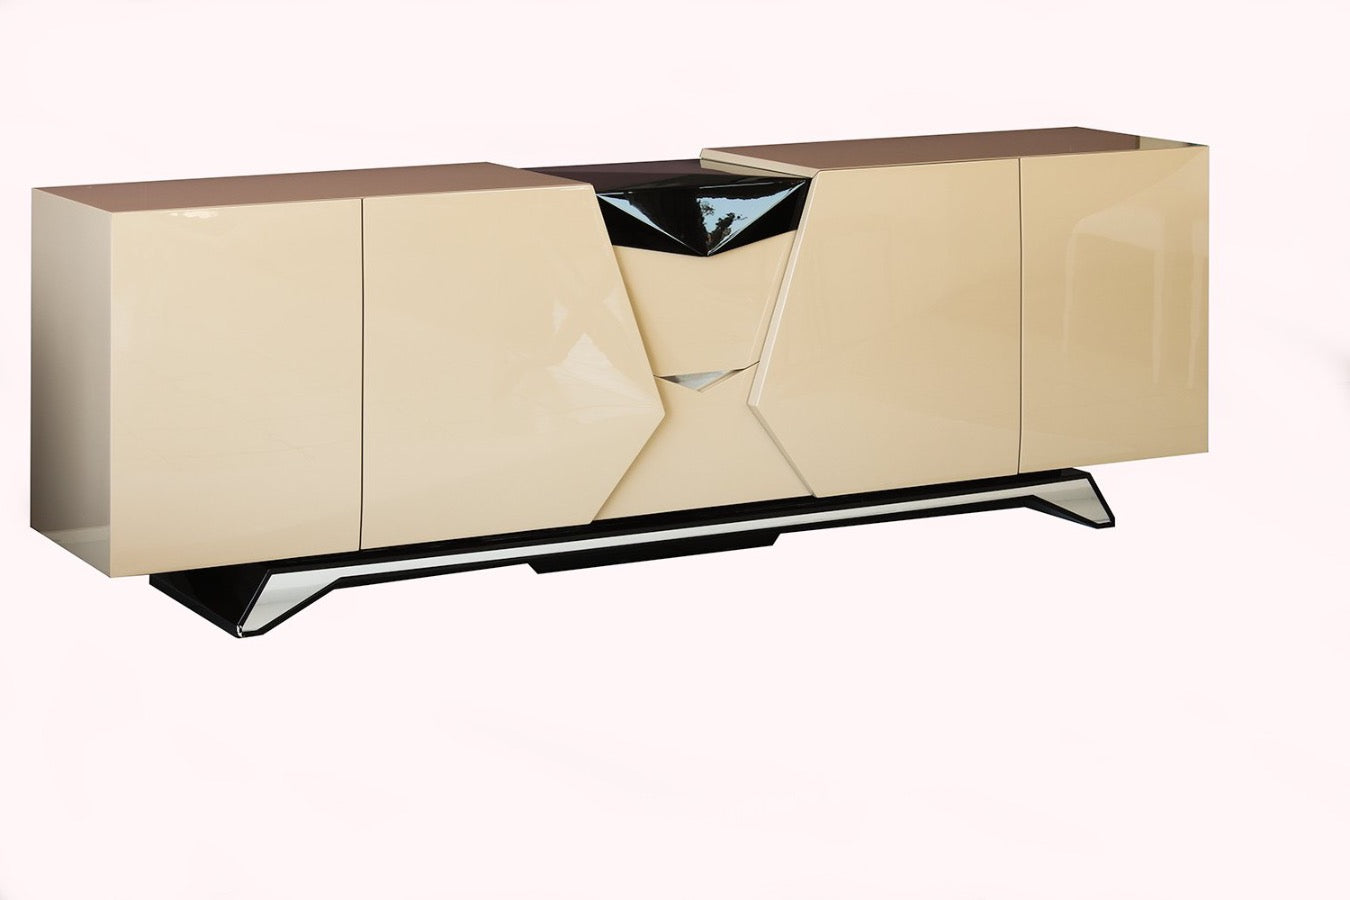 Sideboard in gloss beige wood, with 4 doors and cutlery drawers. Handcrafted in Europe.